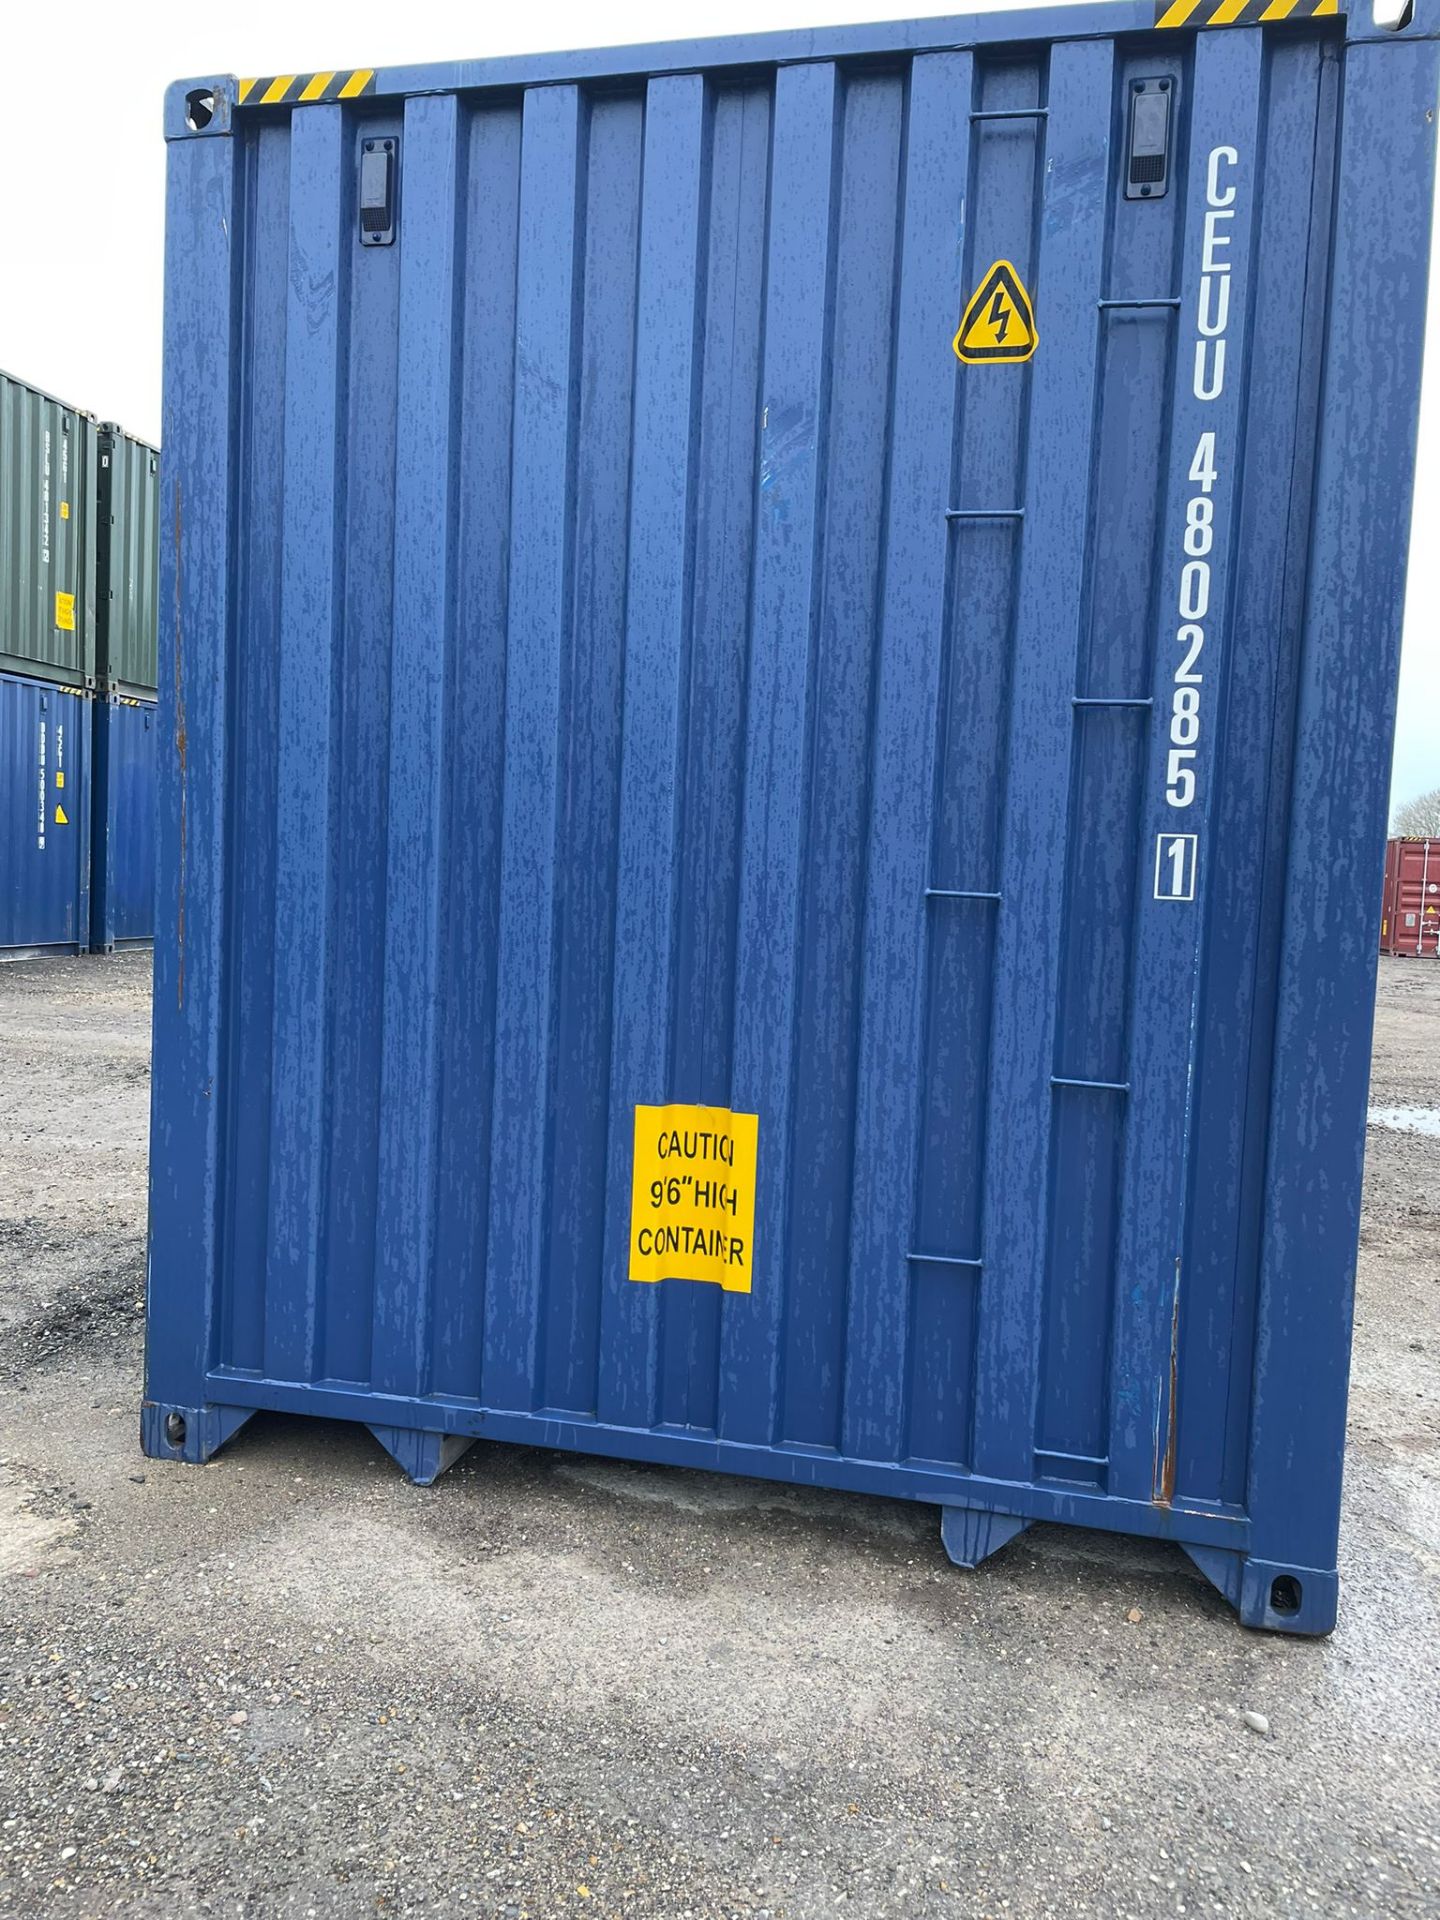 40ft HC Shipping Container - ref CEUU4802851 - Image 5 of 5